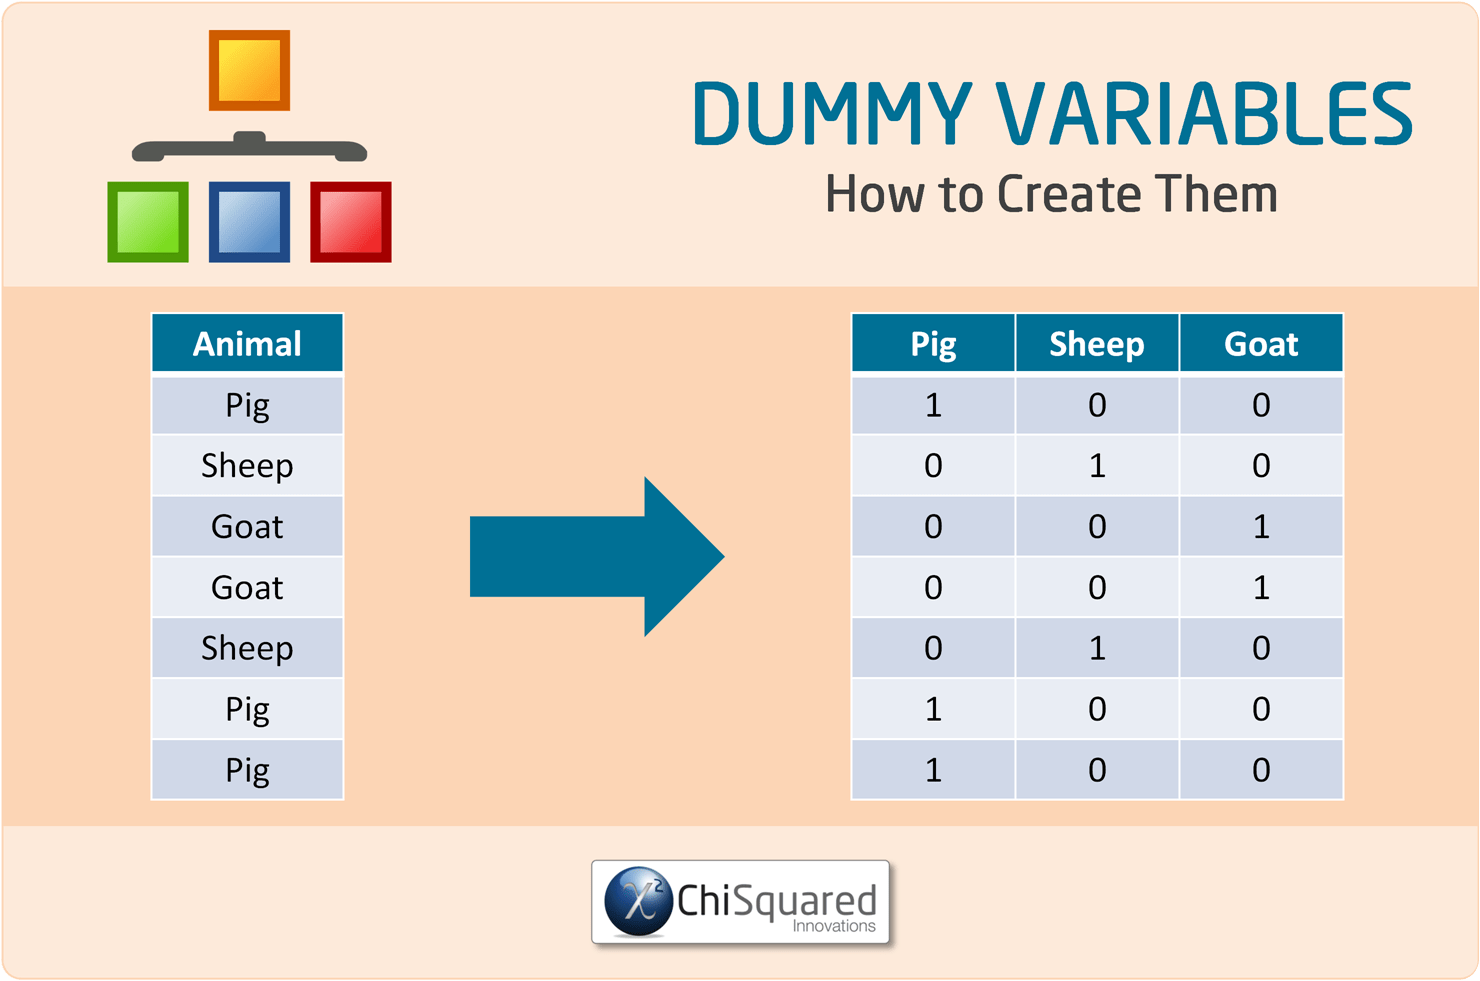 Nominal Data as Dummy Variables